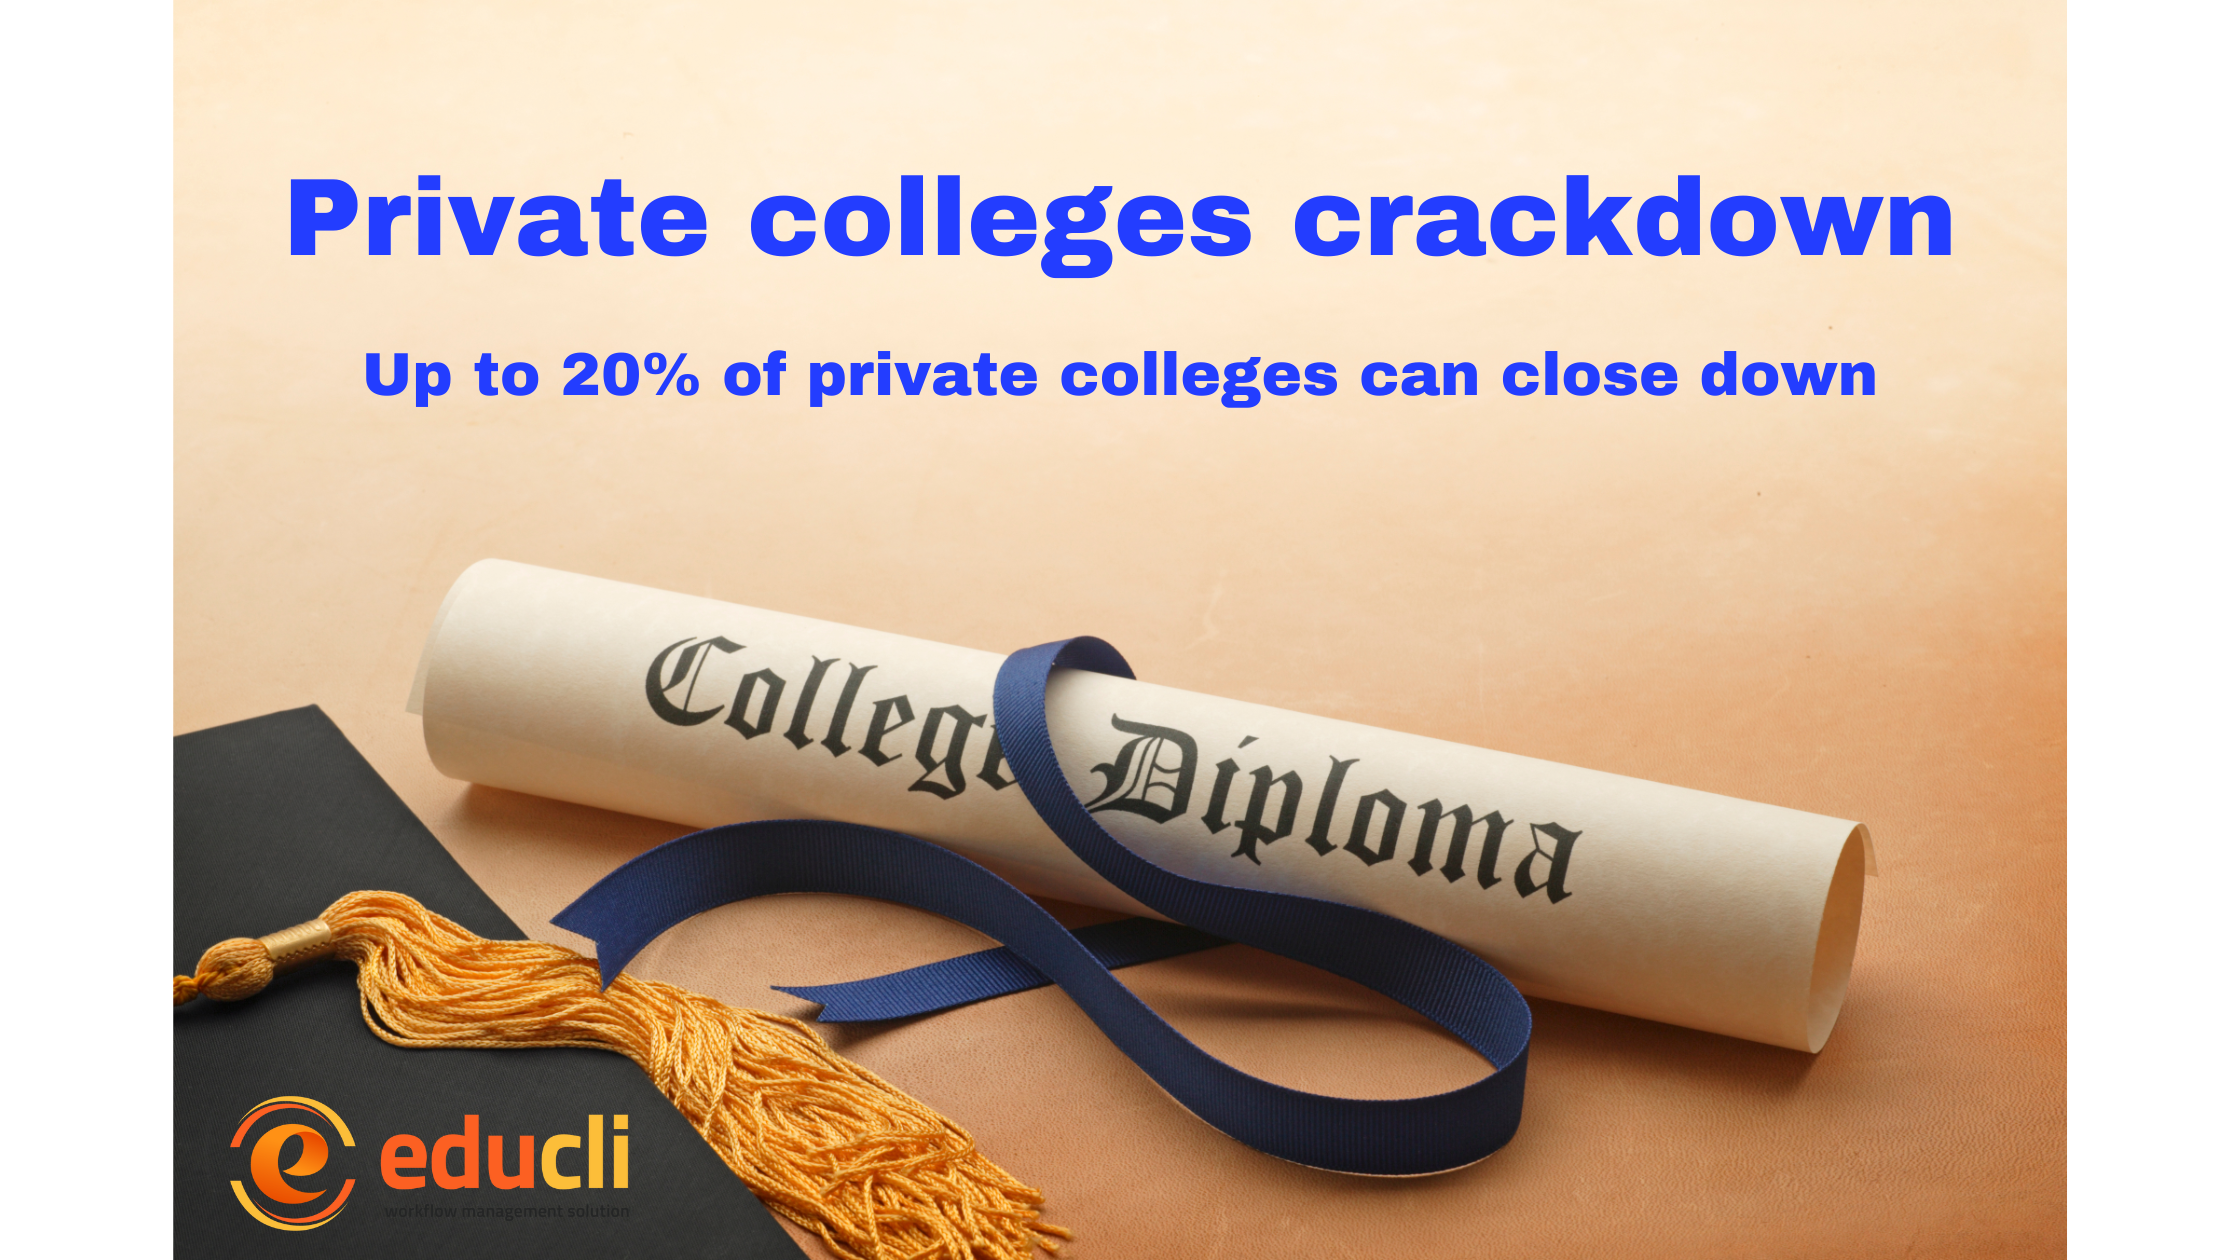 Private colleges crackdown